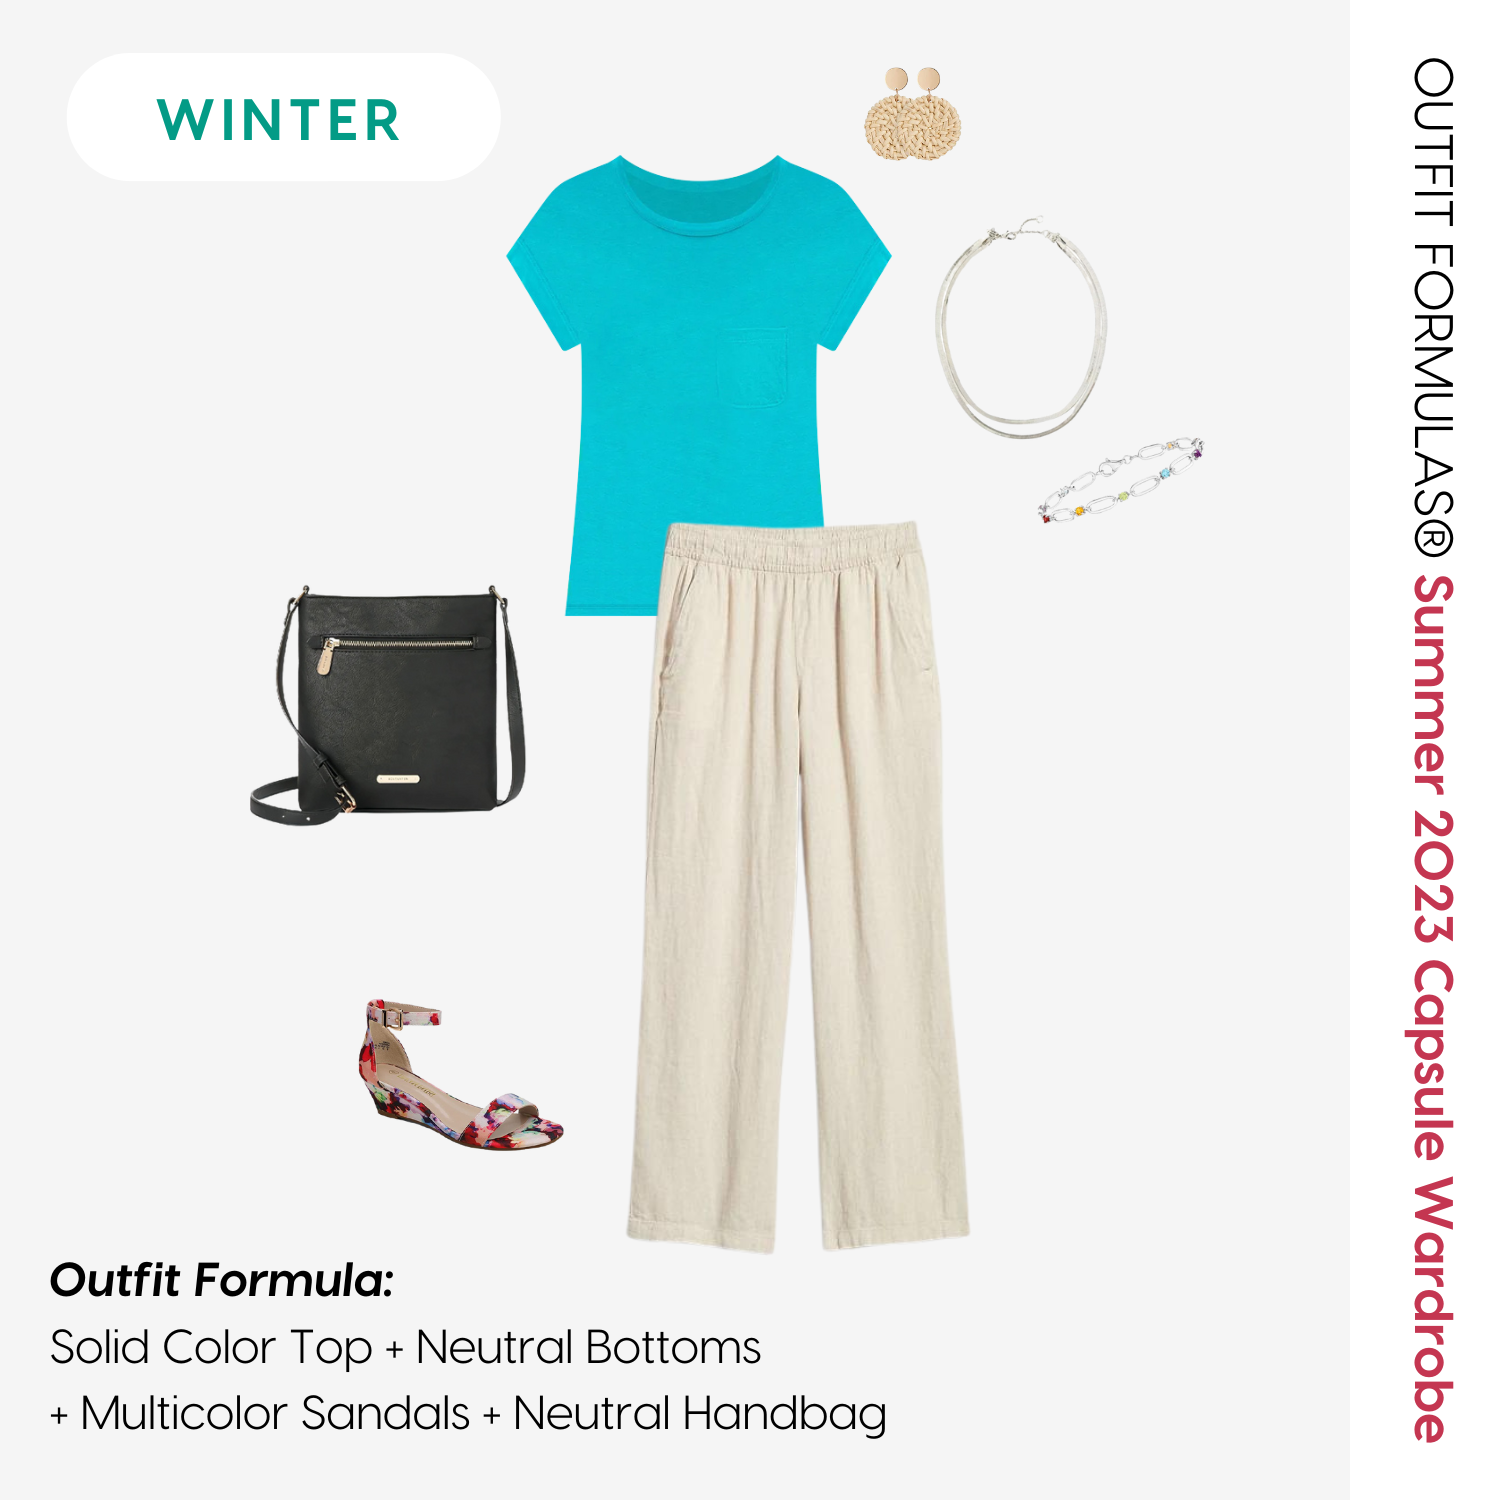 How to dress to color seasons - Winter color season